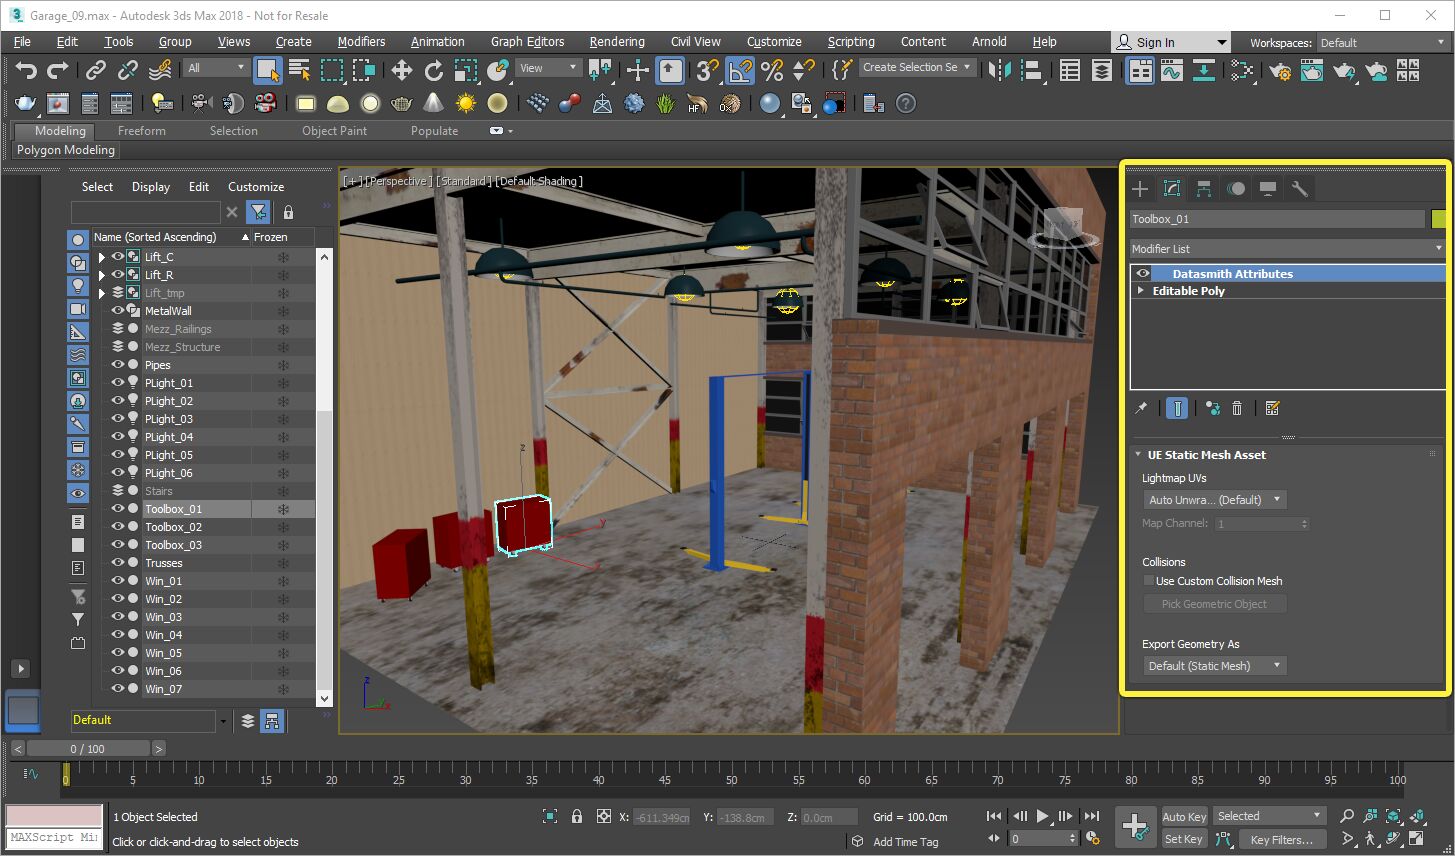 how to toggle between viewports in autodesk 3ds max 2018